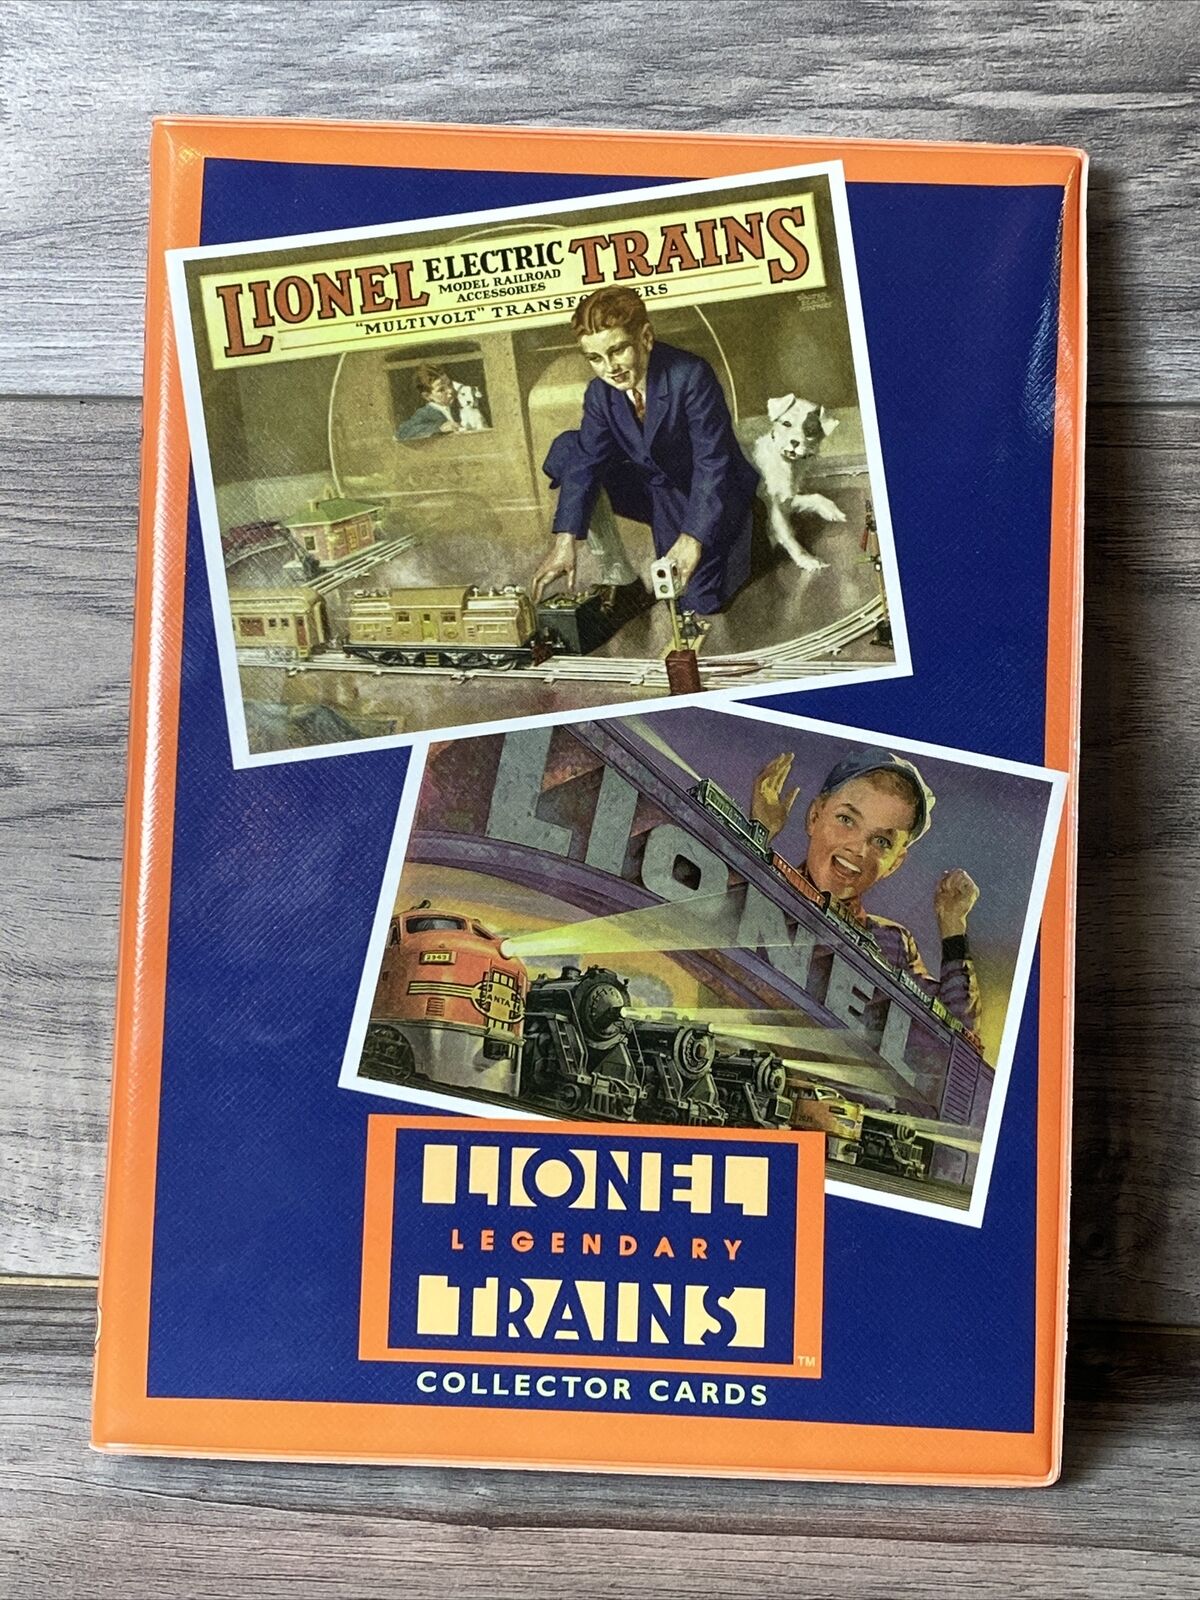 1997 LIONEL LEGENDARY TRAINS COLLECTOR ALBUM With All 72 cards